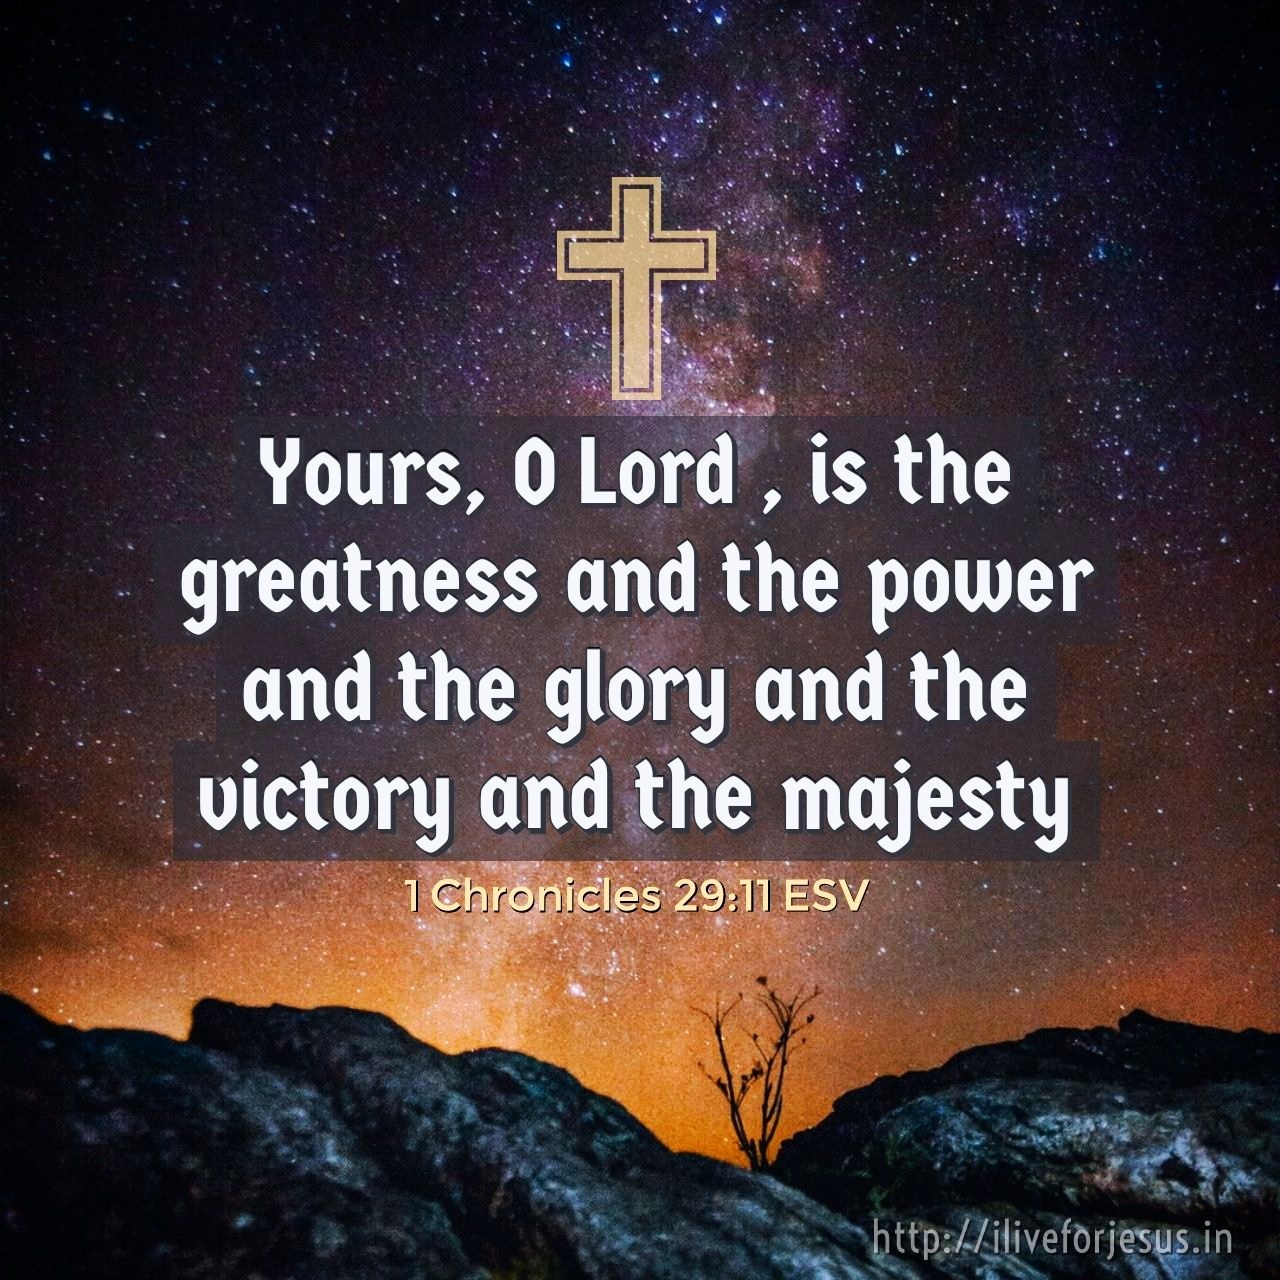 Yours, O Lord , is the greatness and the power and the glory and the victory and the majesty, for all that is in the heavens and in the earth is yours. Yours is the kingdom, O Lord , and you are exalted as head above all. 1 Chronicles 29:11 ESV